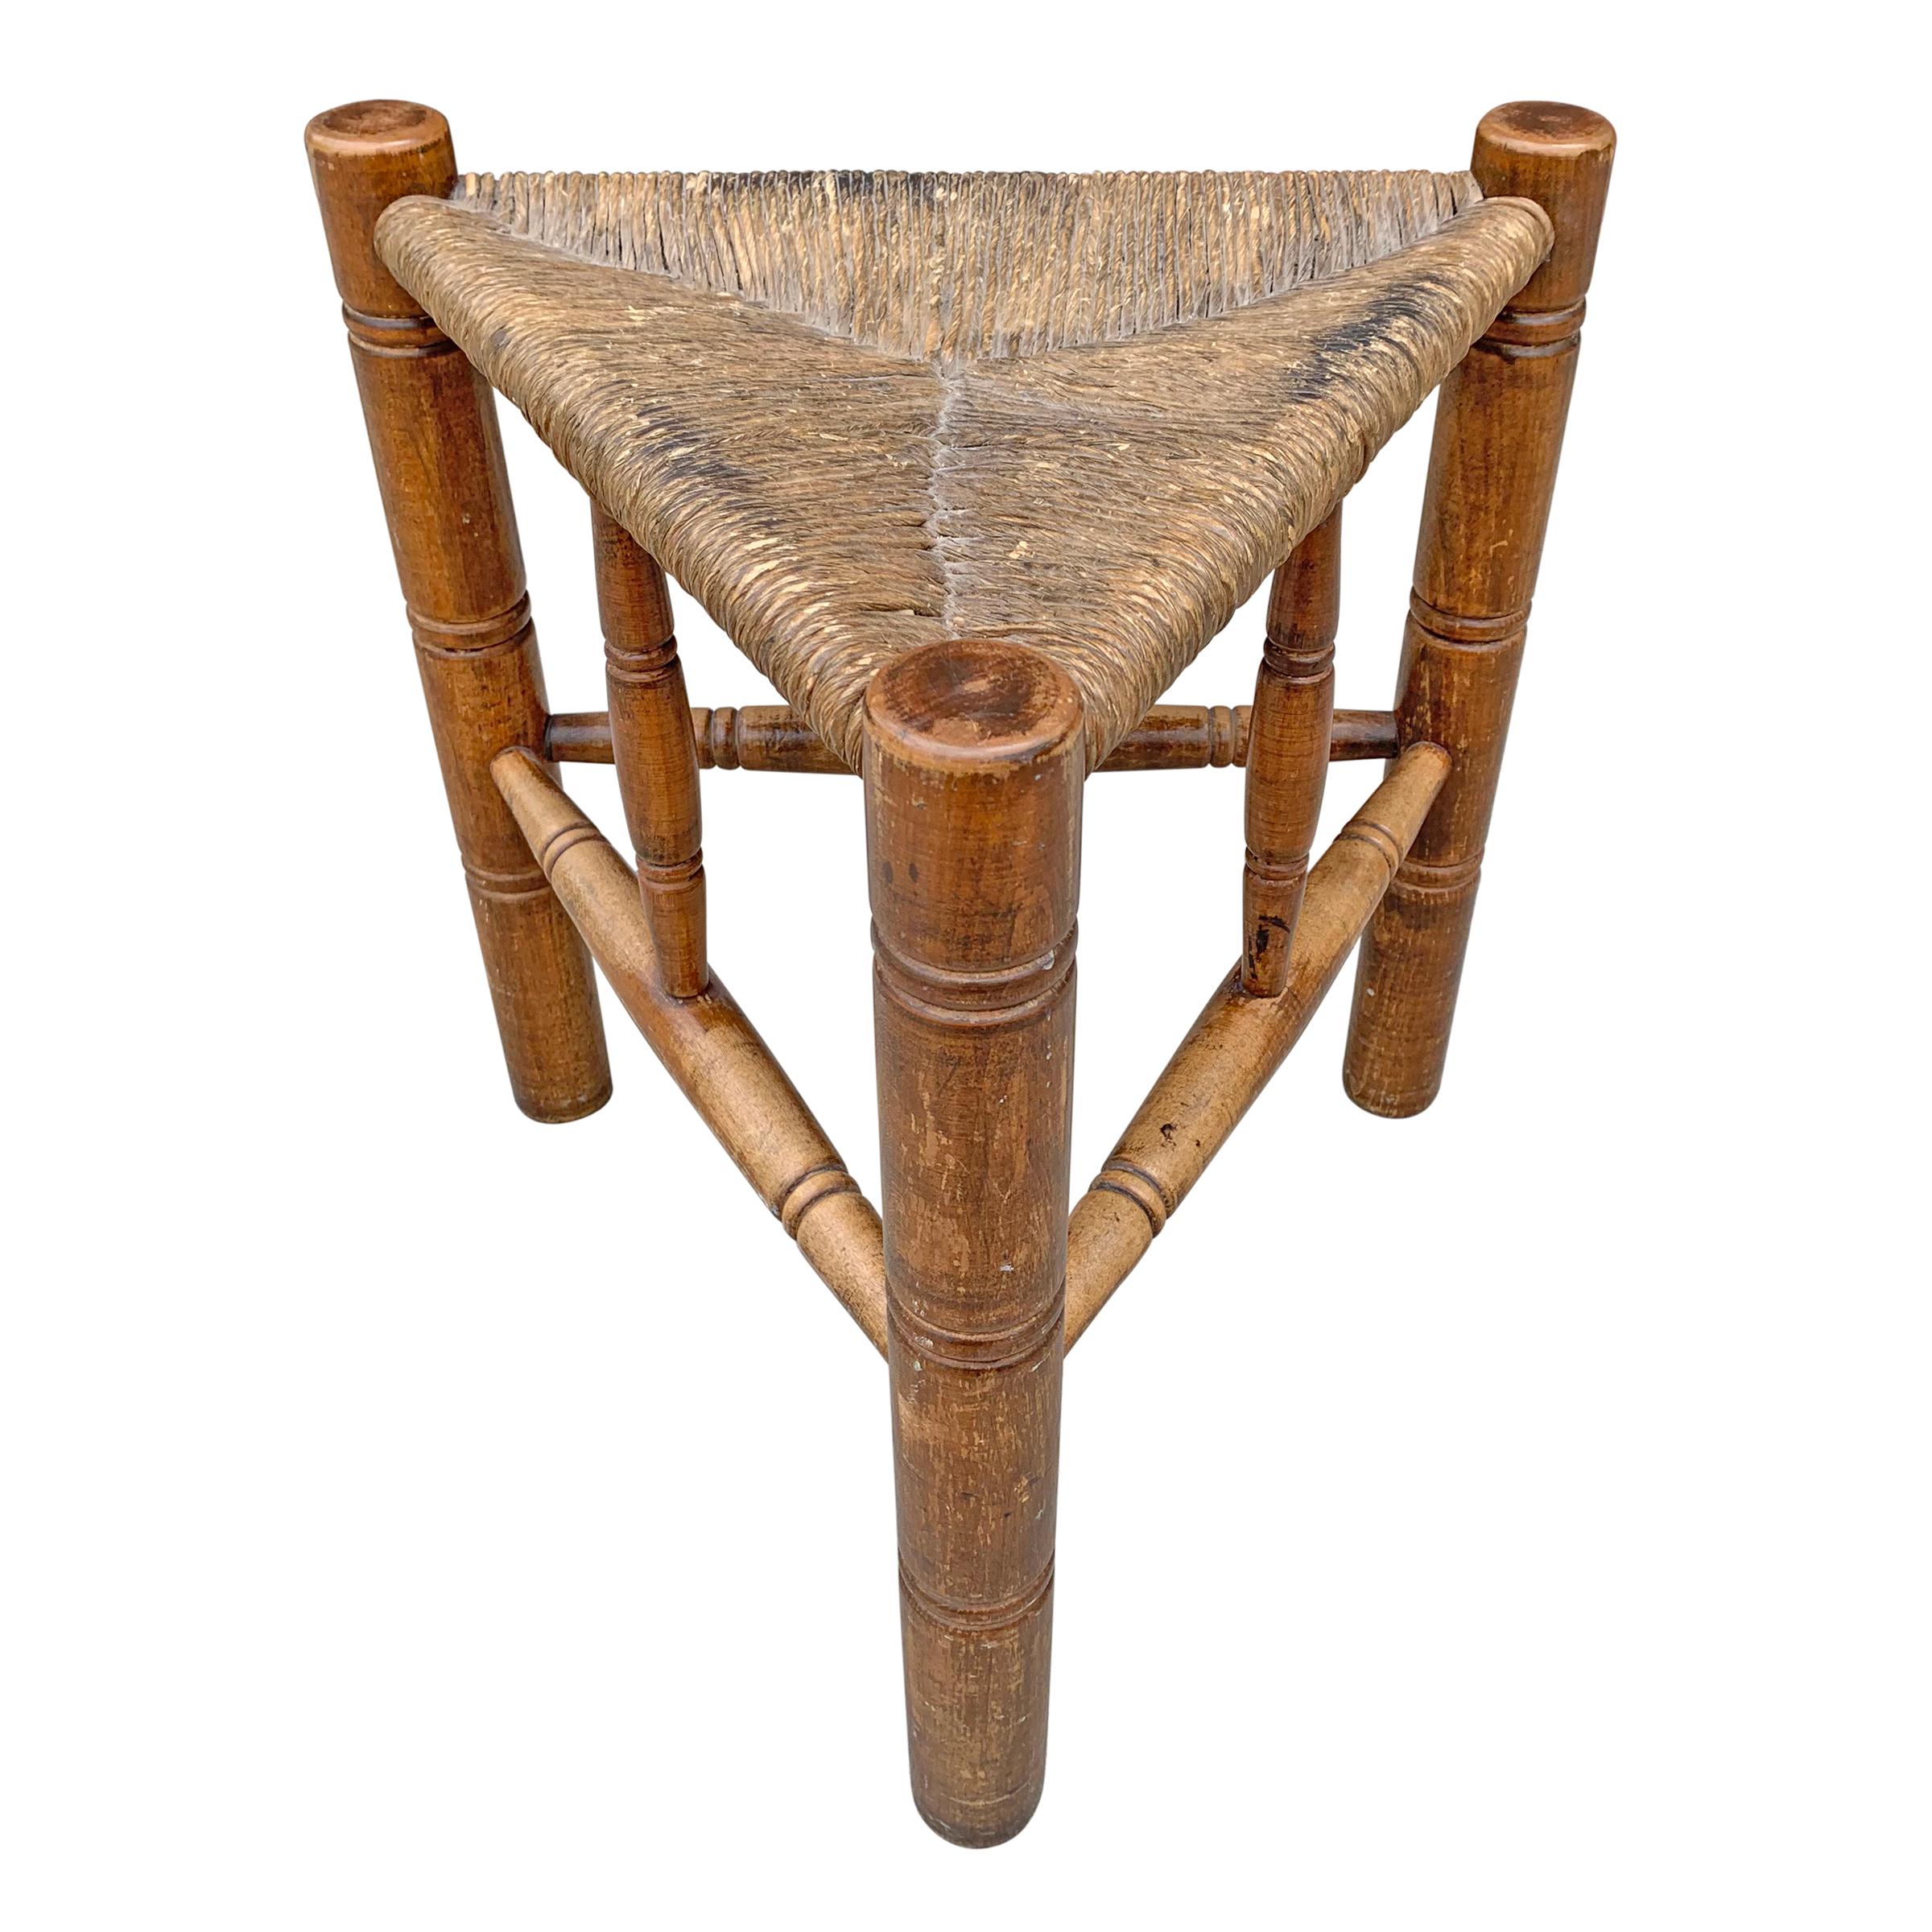 American Colonial Three-Legged Stool with a Woven Rush Seat by Wallace Nutting